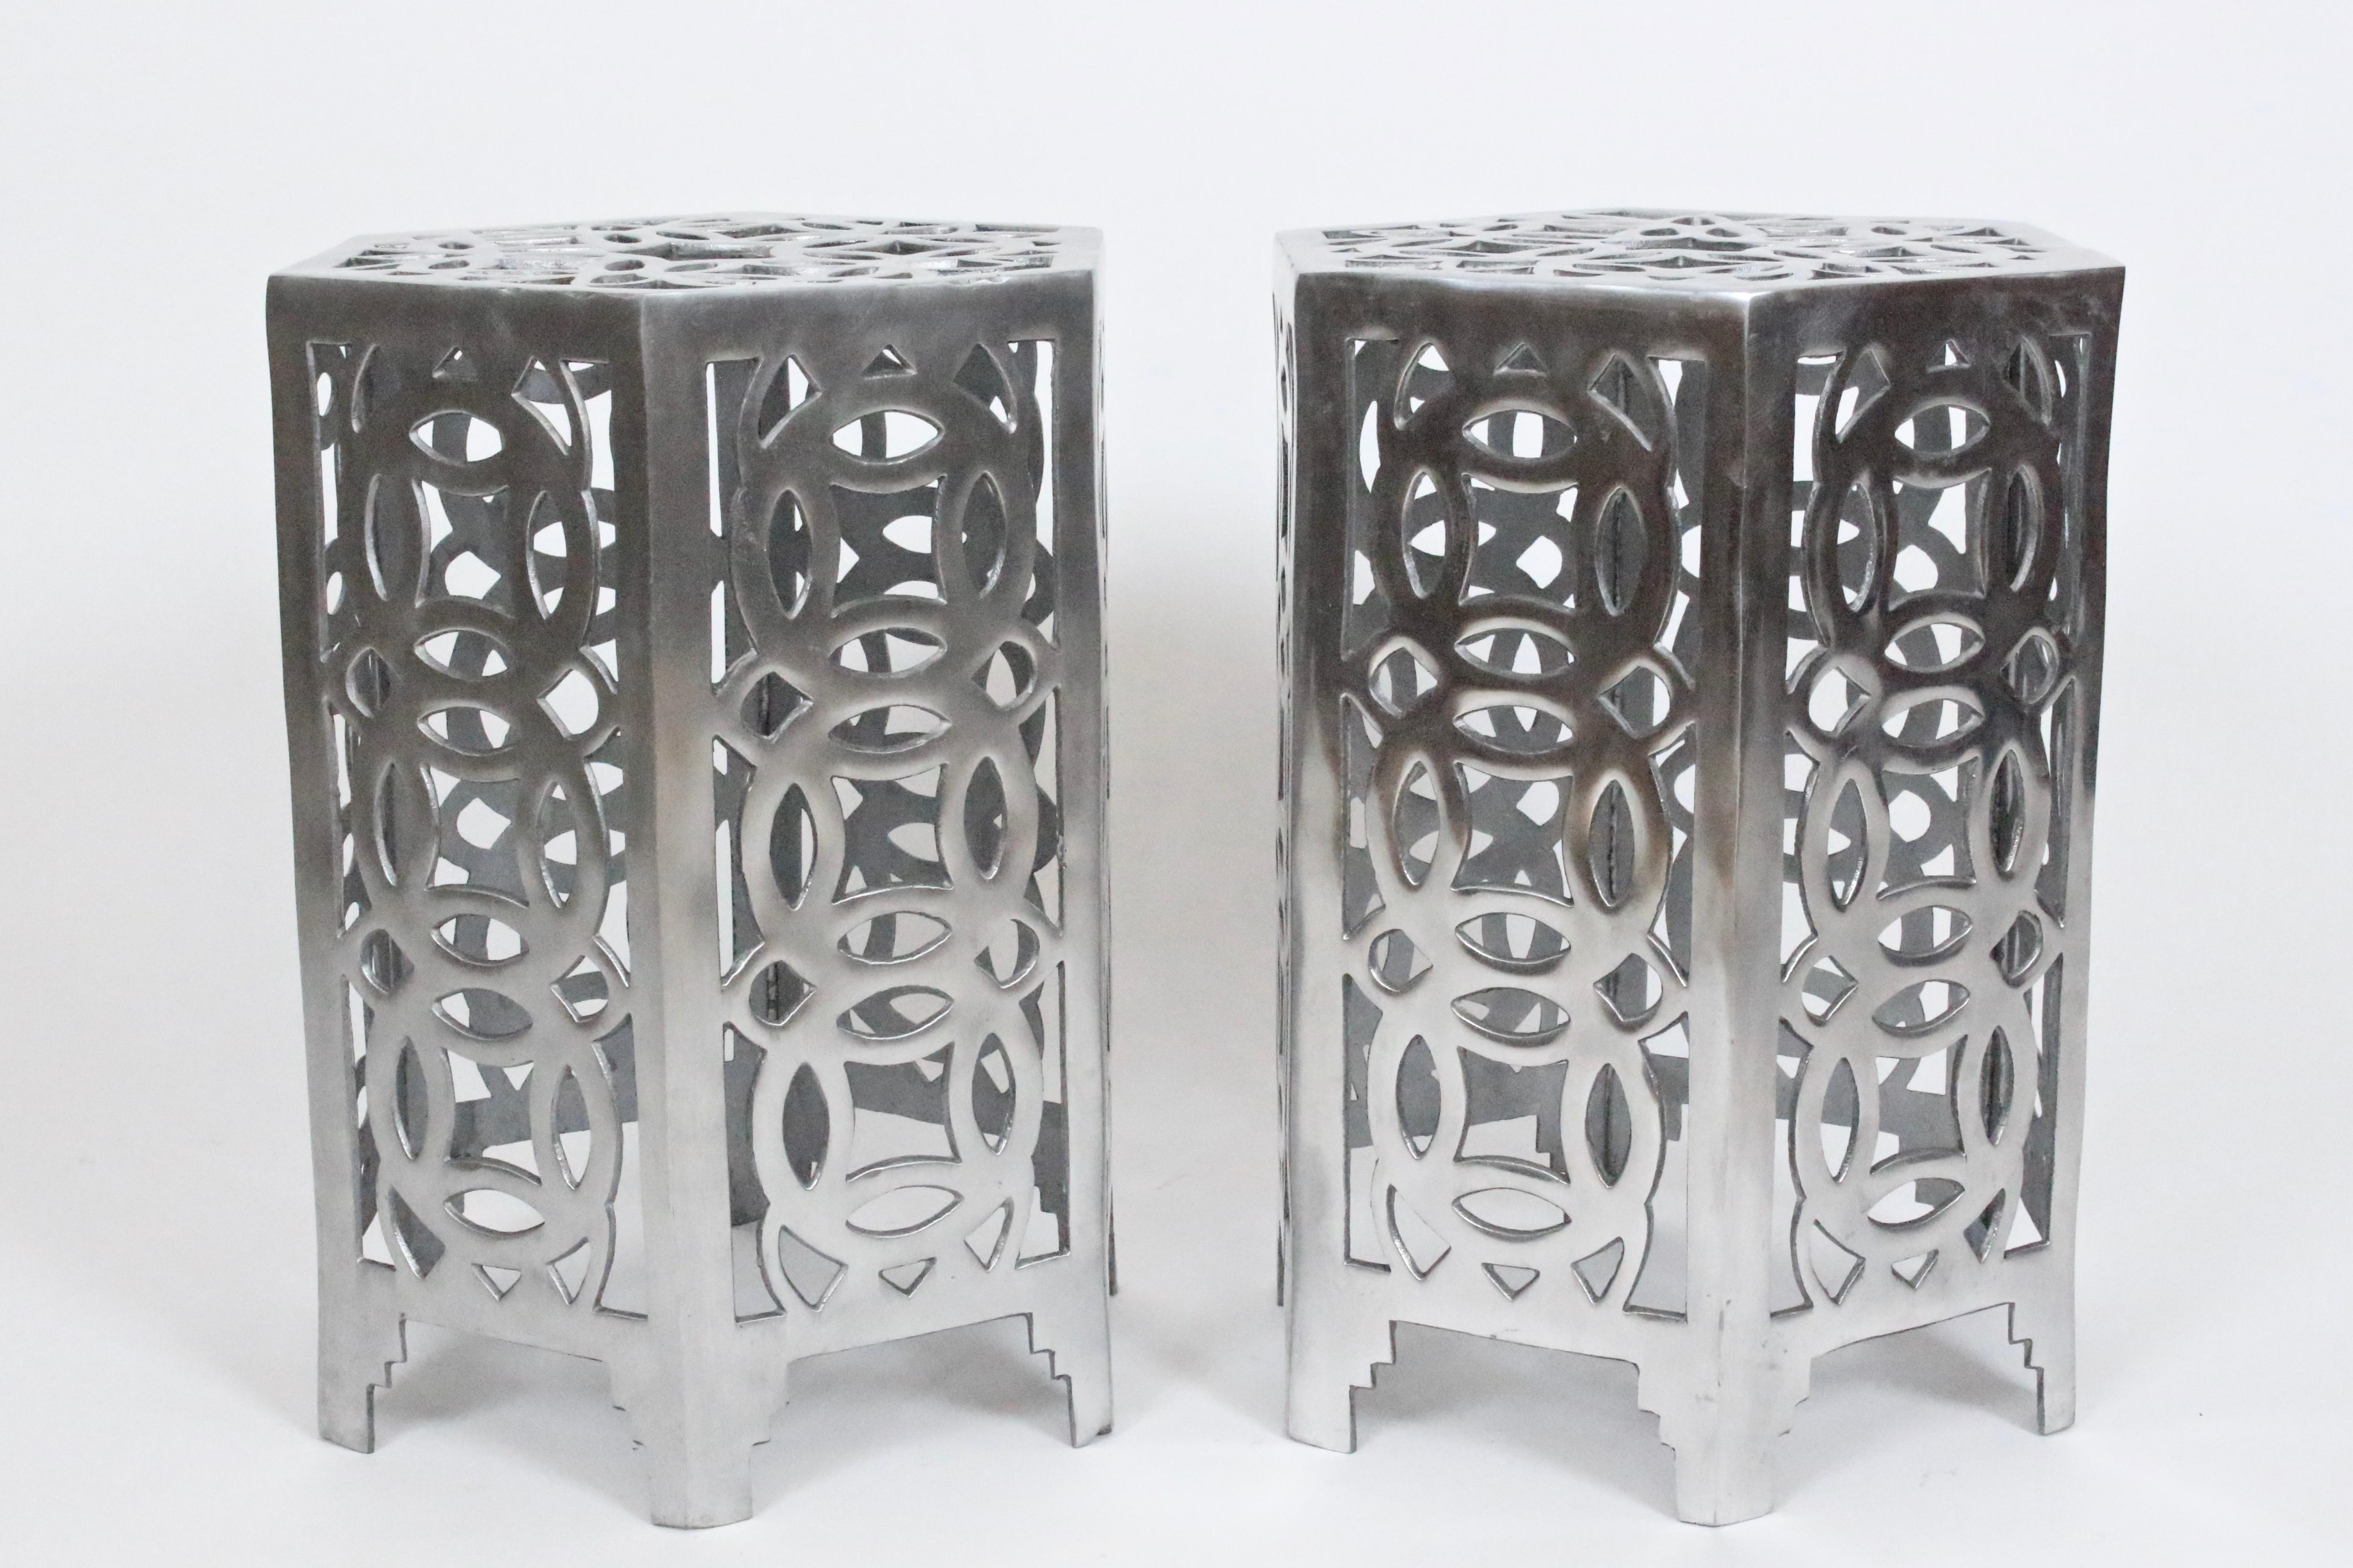 Pair of Arthur Court style Cast Aluminum Chinese Coin end tables, coffee tables, conservatory tables. stools. plant stands. Featuring fine quality, Eastern motif balanced, welded and hand assembled six sided polished cast aluminum with stepped leg